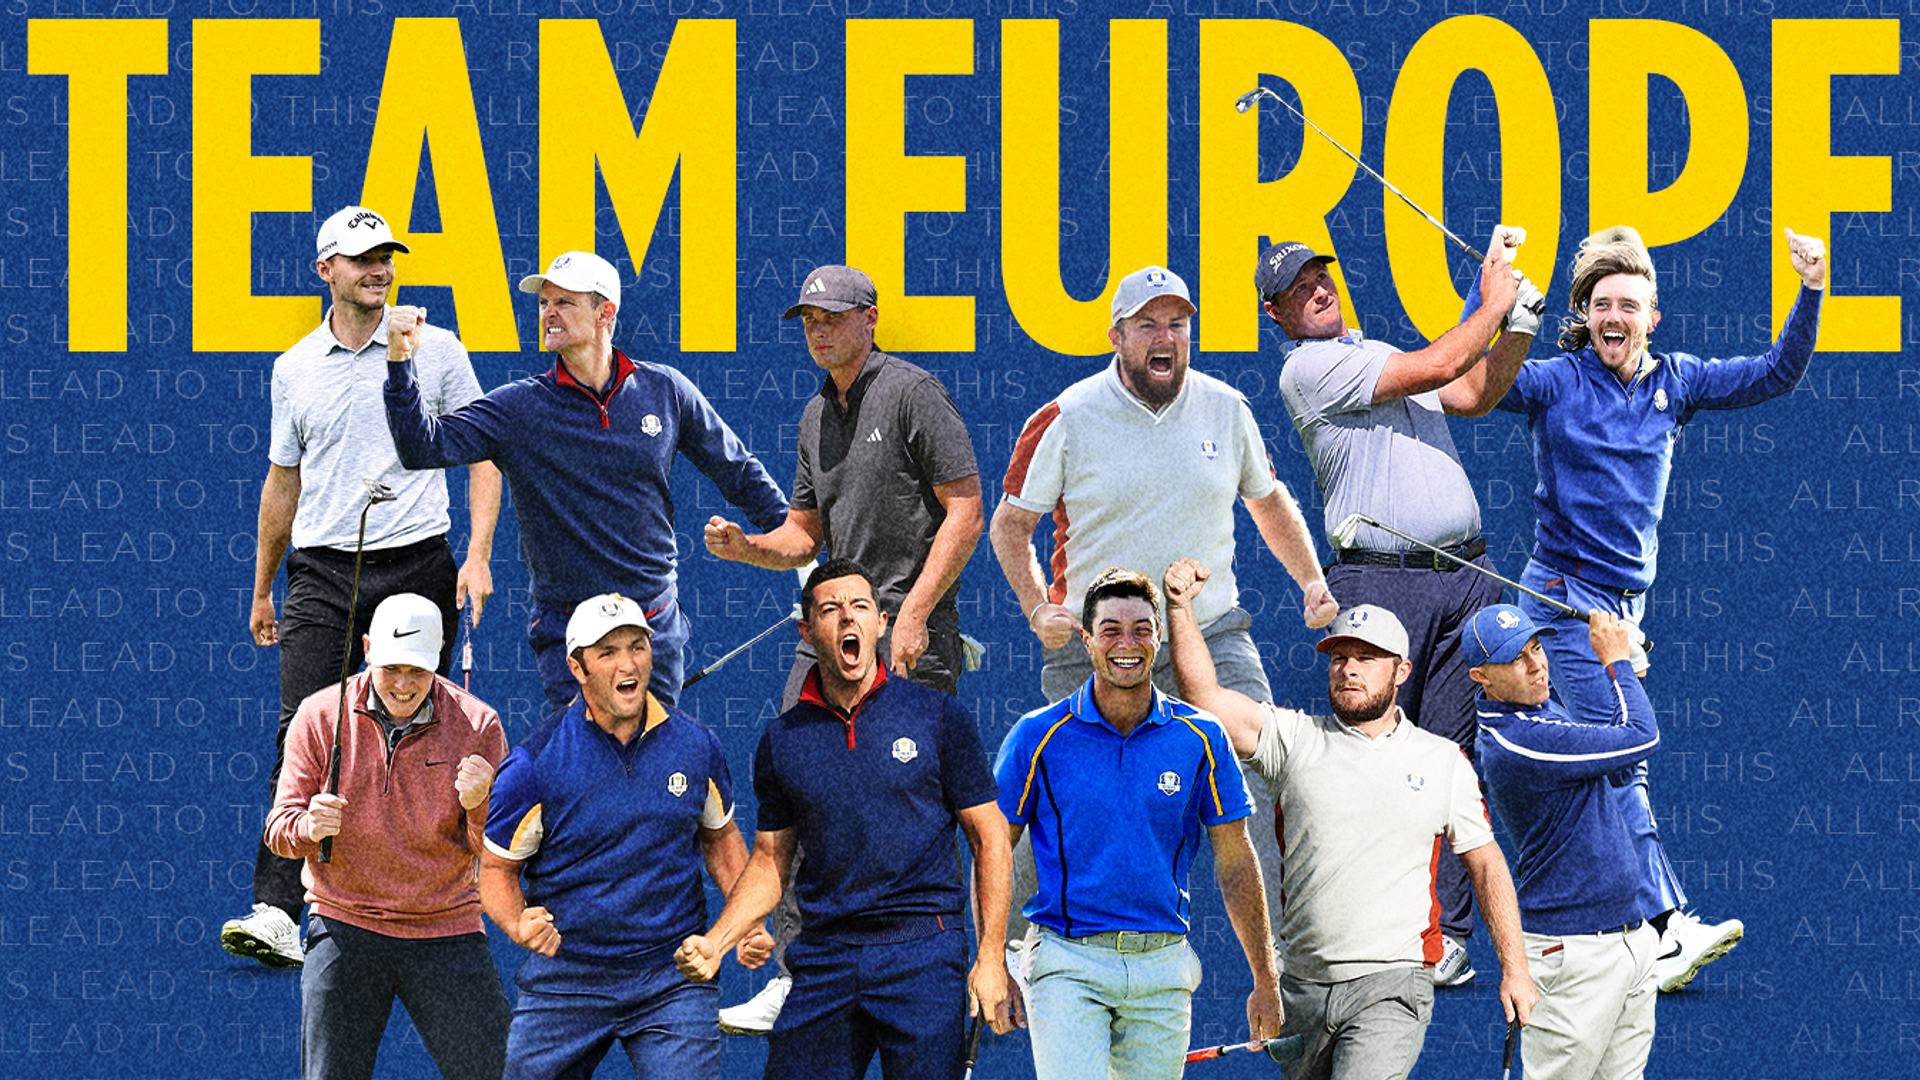 Ryder Cup player guide: A new era for Team Europe?